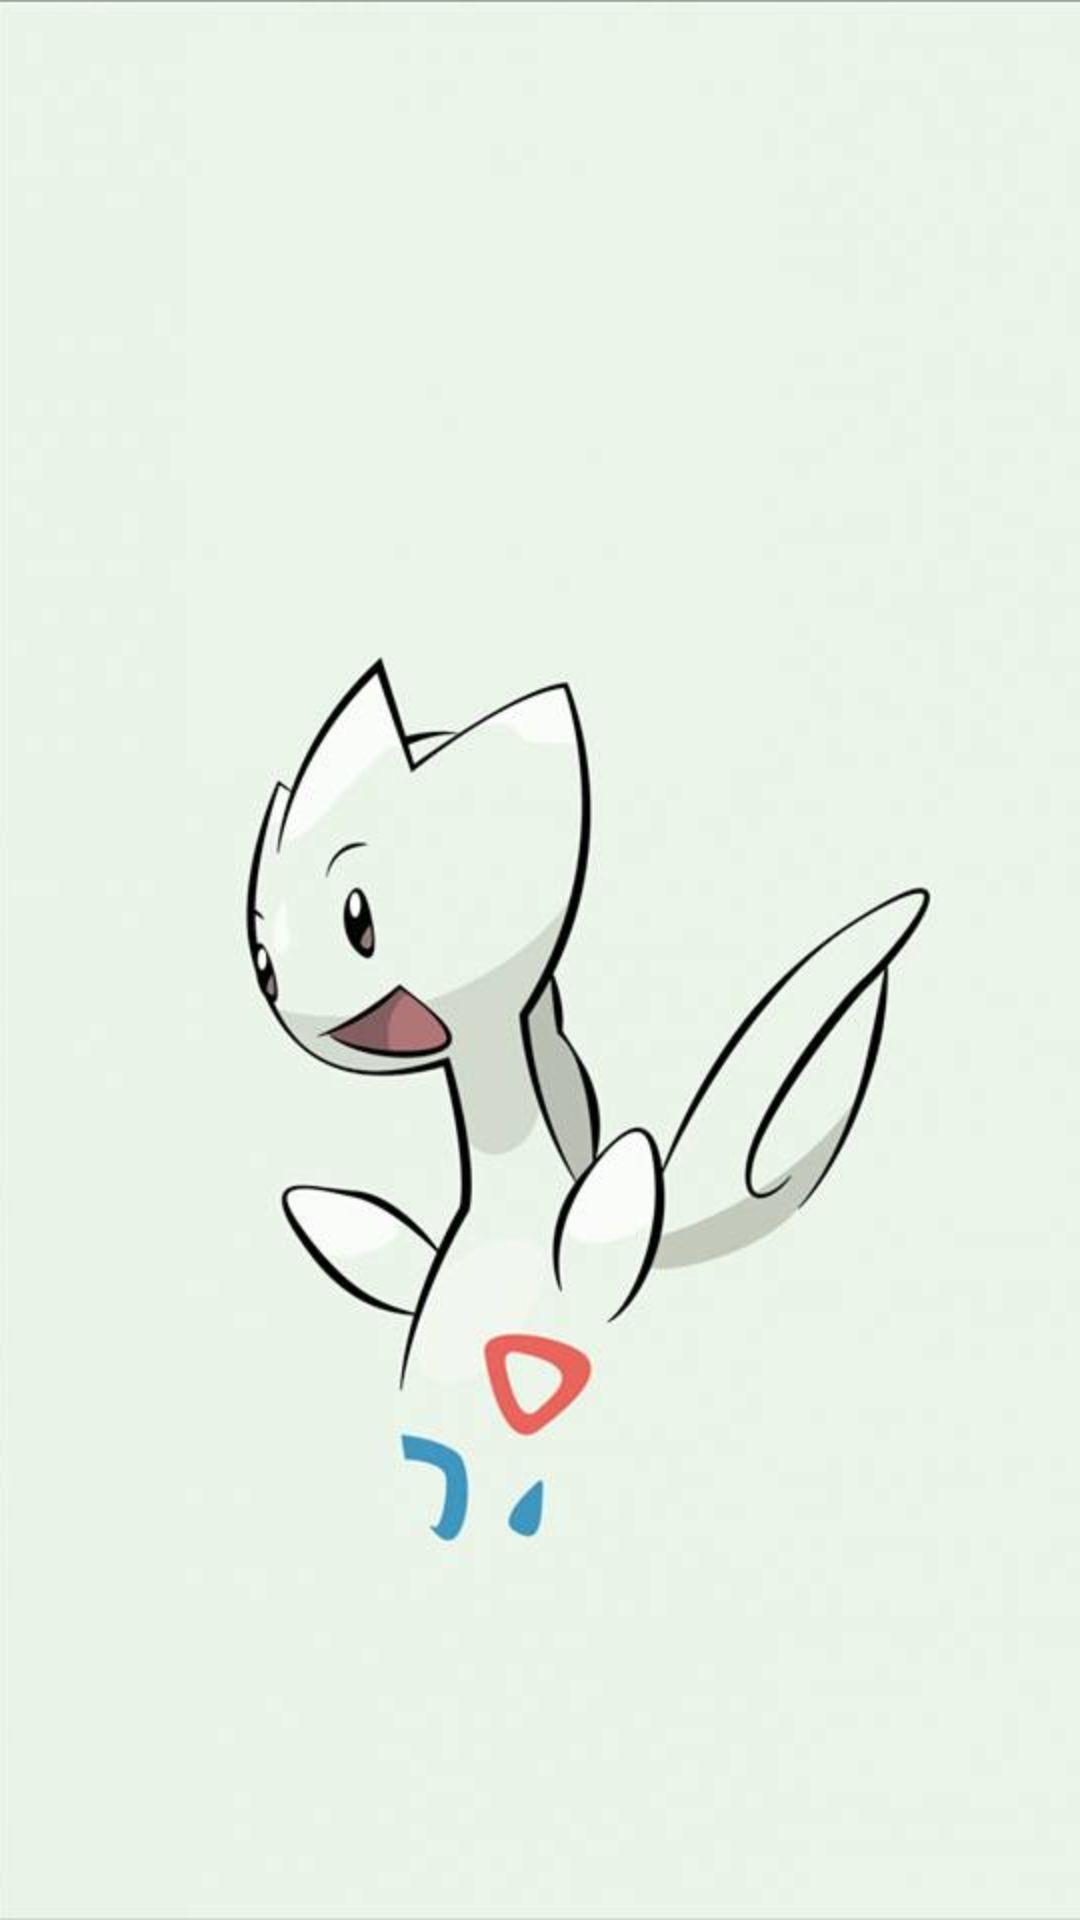 Togetic to see more of the cutest Pokemon wallpaper